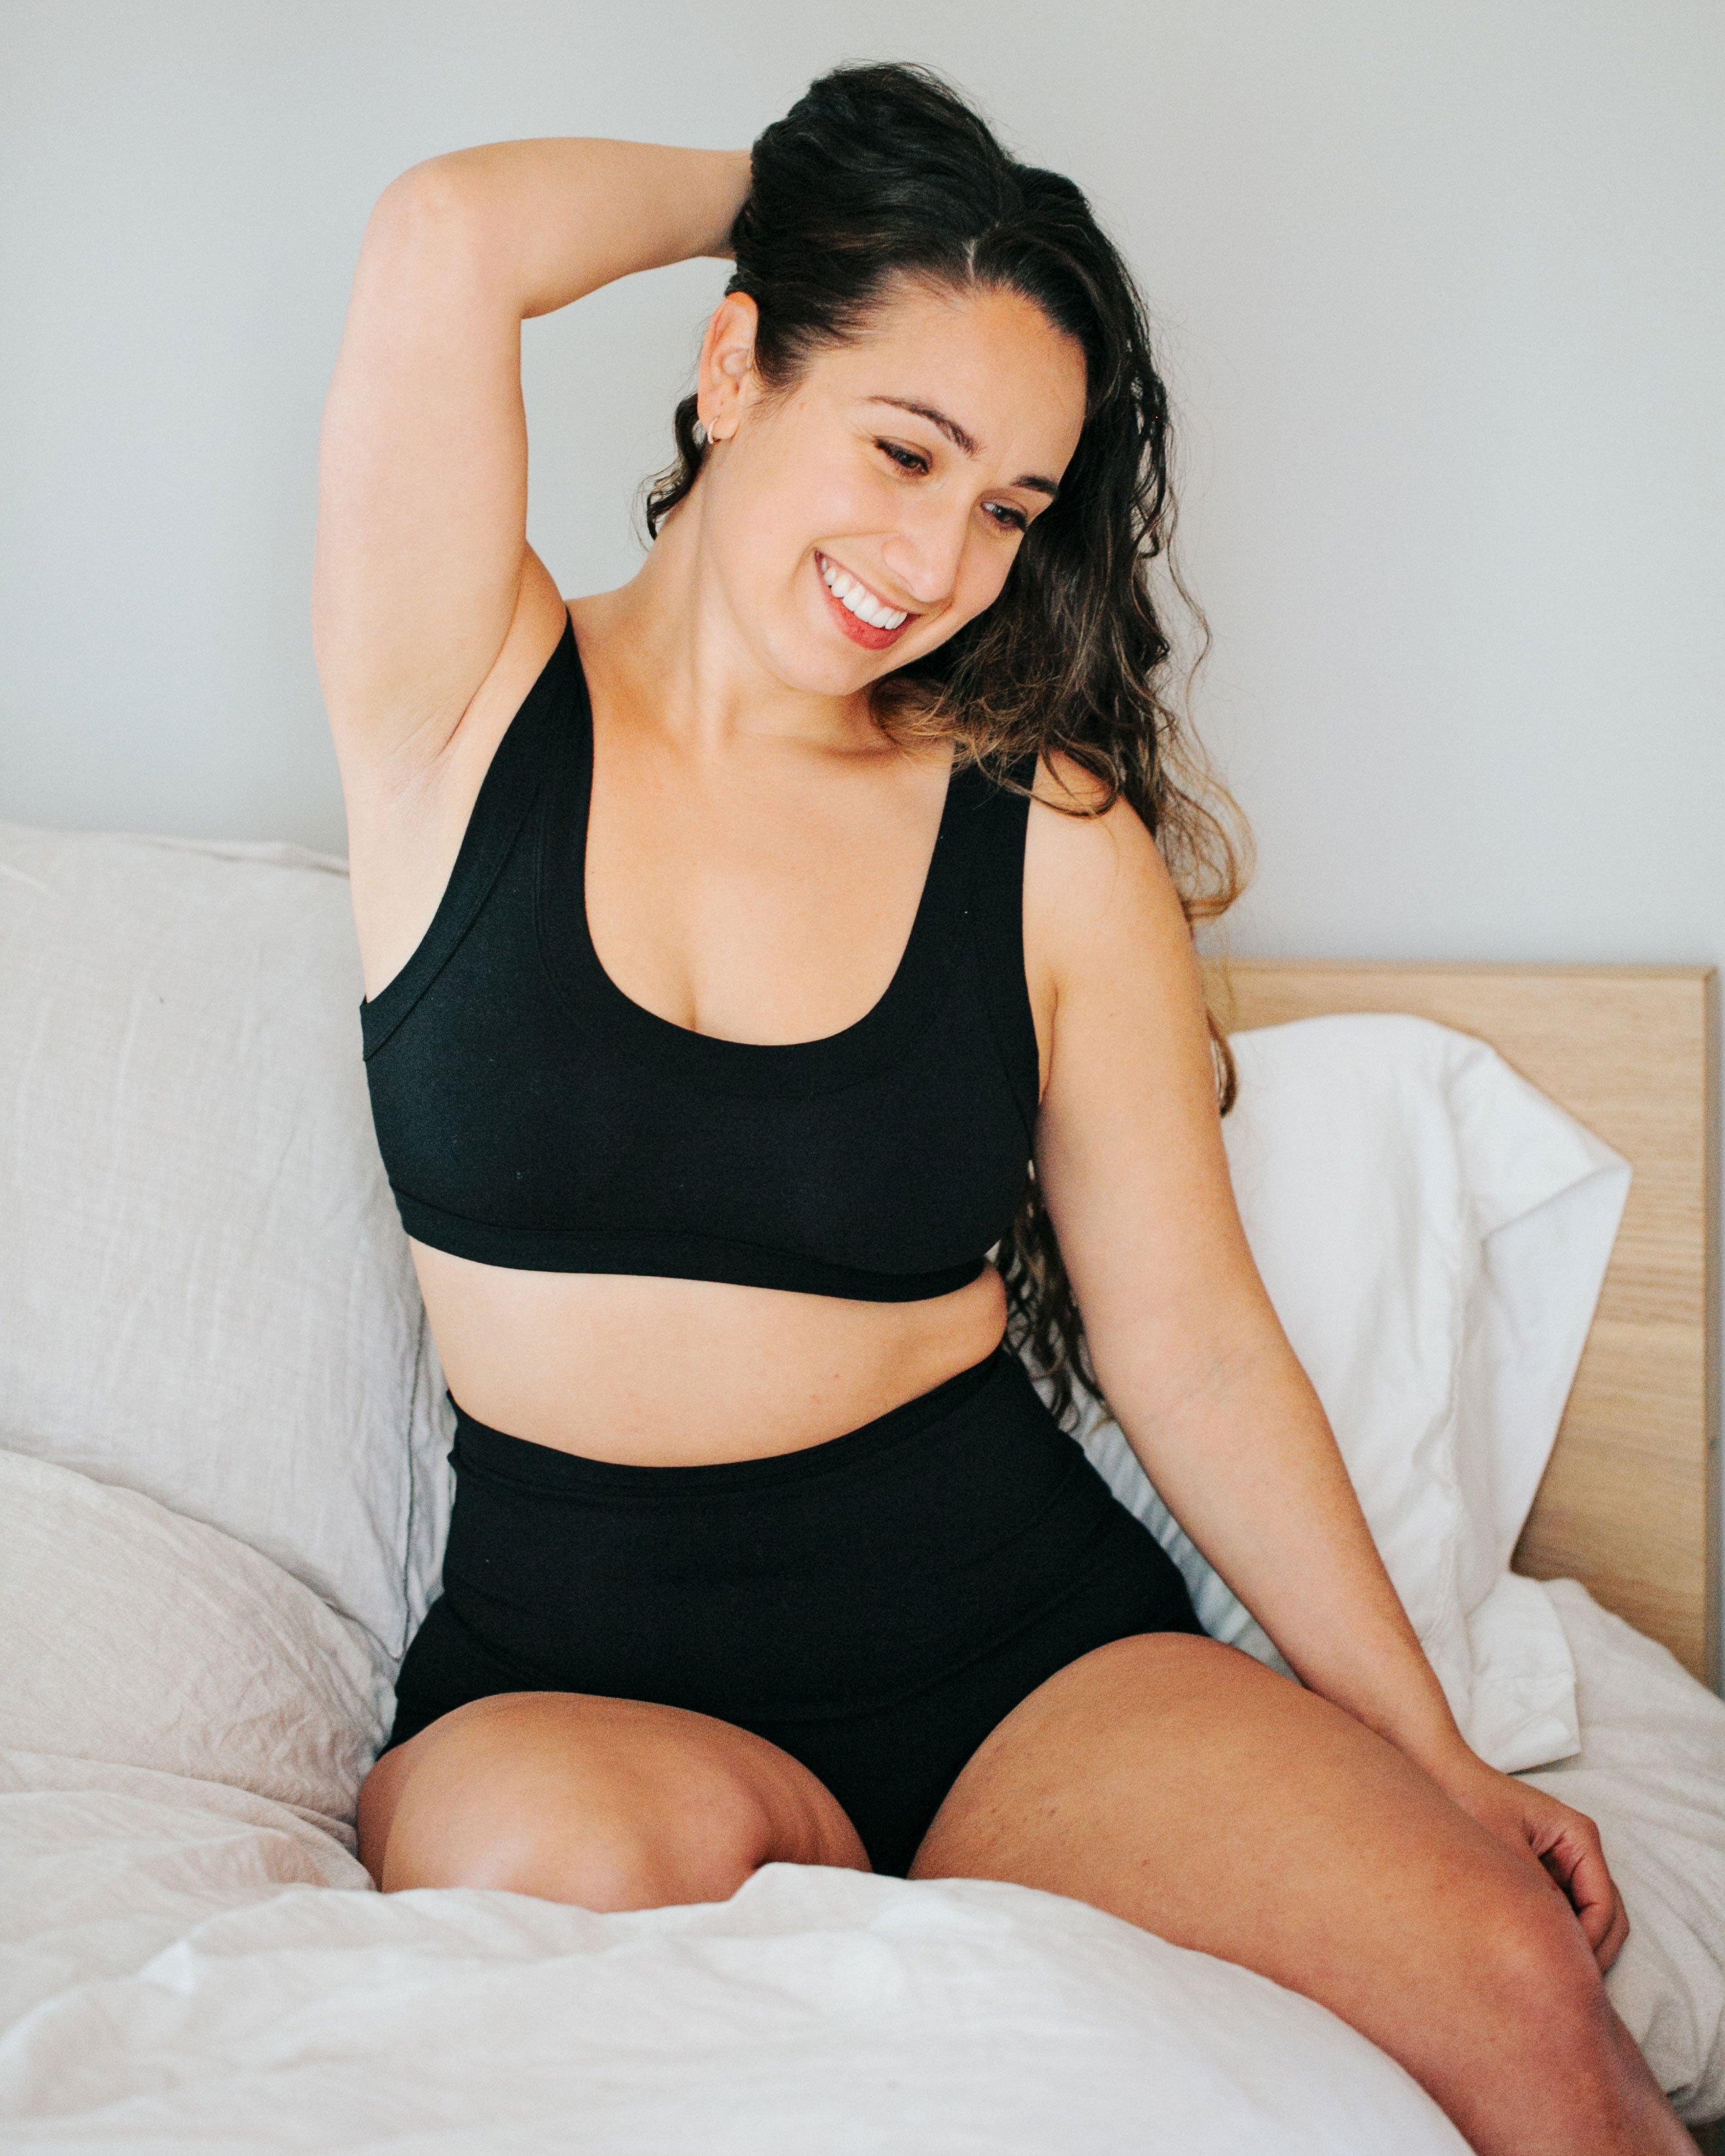 Model sitting on a bed smiling wearing Plain Black Sky Rise underwear and Bralette set.